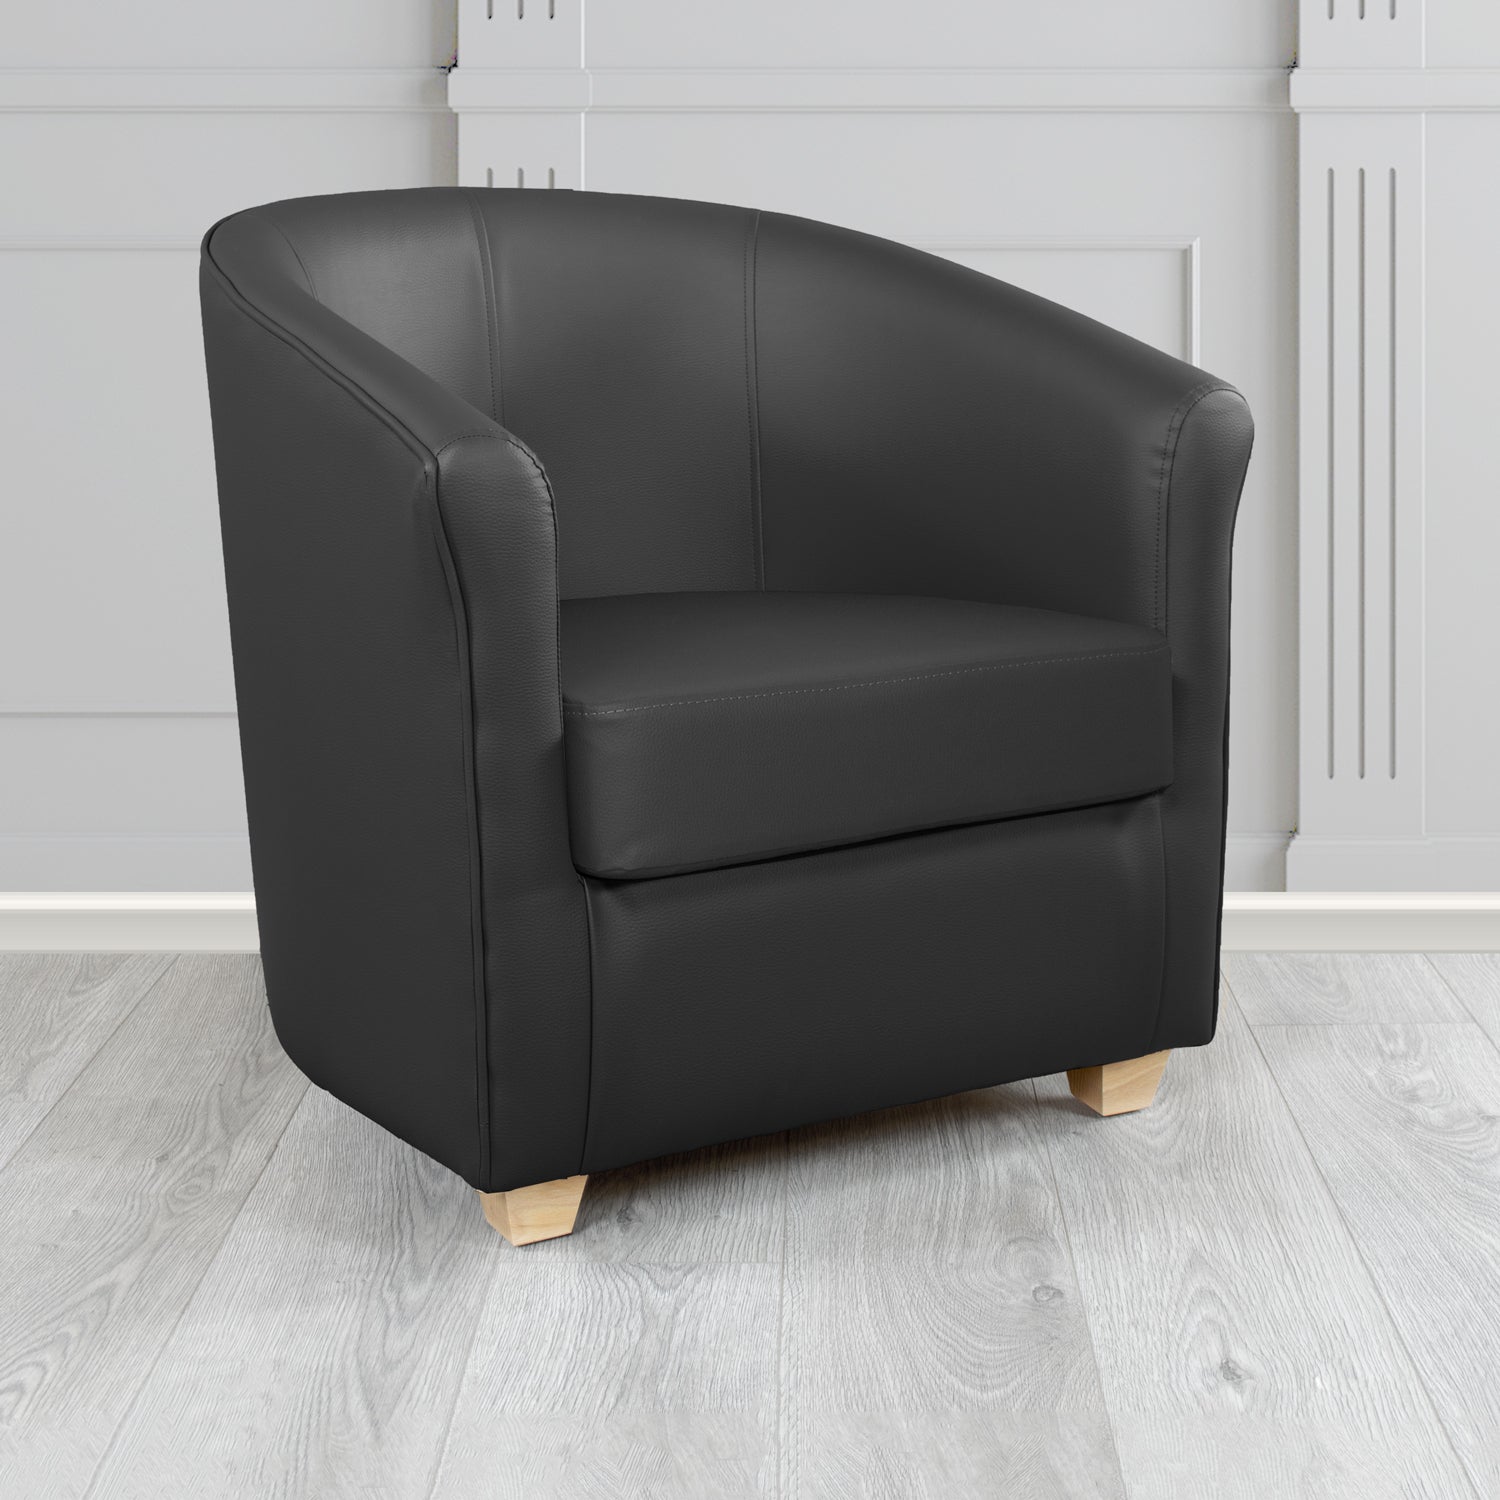 Cannes Tub Chair in Madrid Black Faux Leather - The Tub Chair Shop